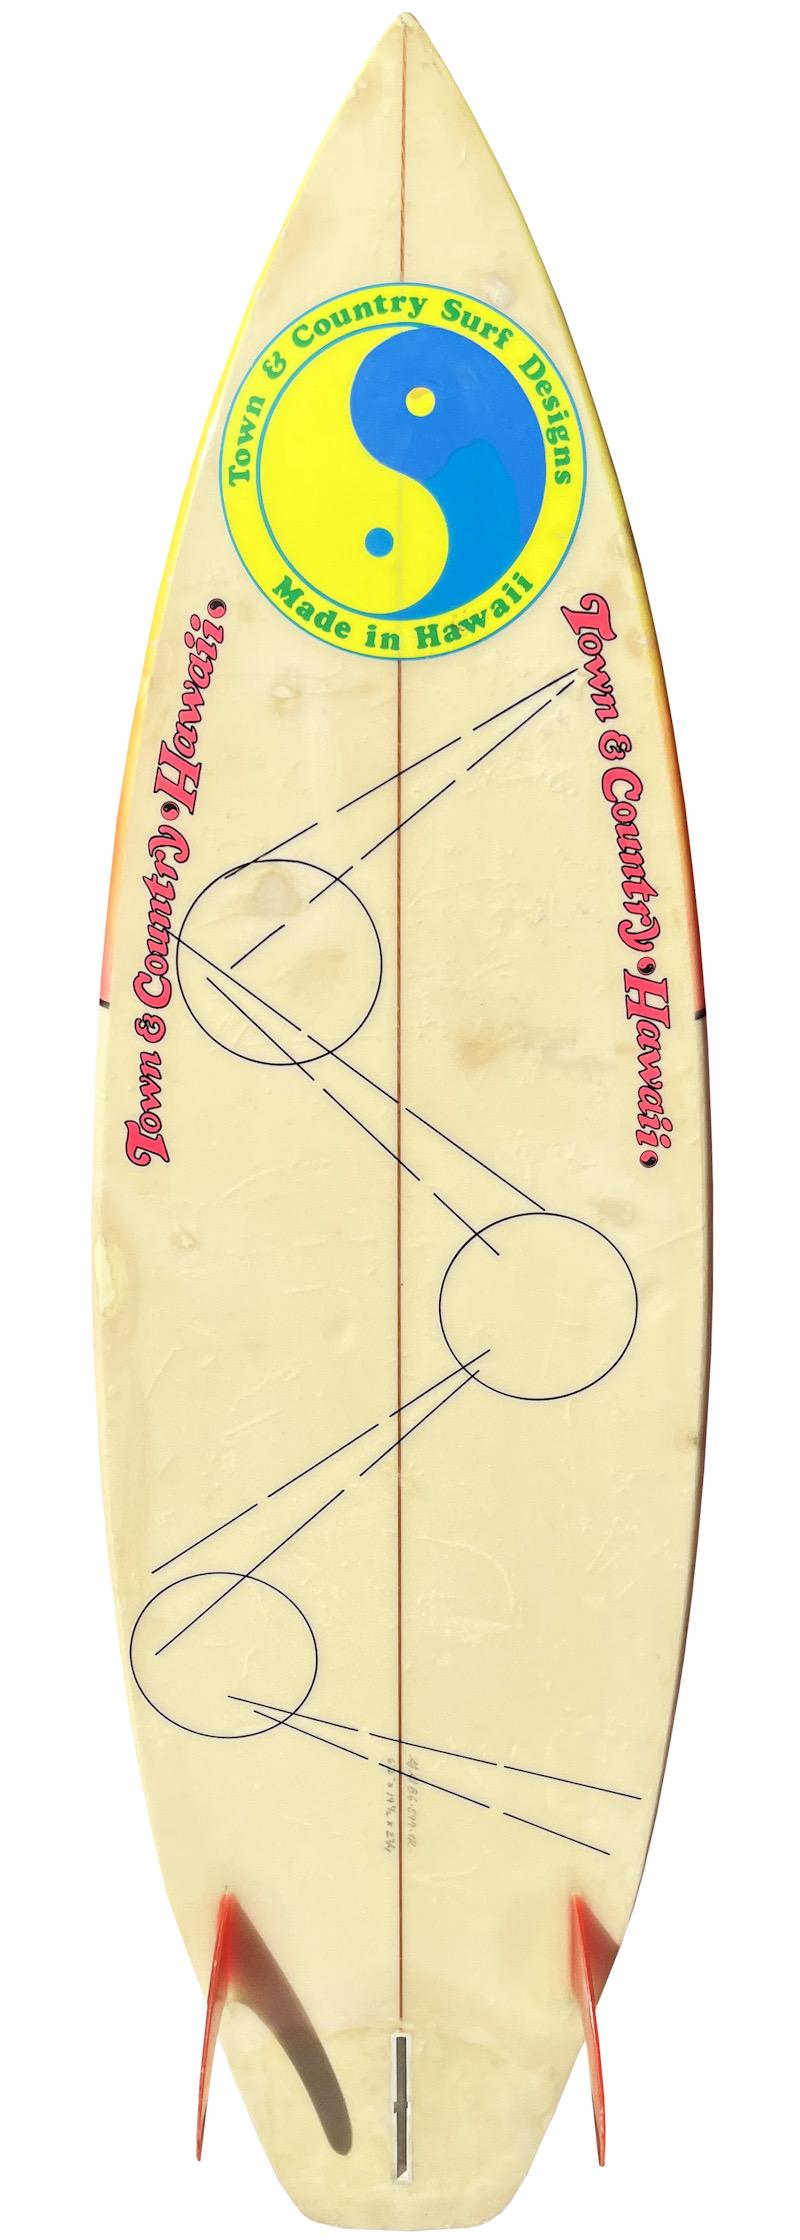 1986 Town and Country surfboard made by Greg Griffin. Features an original airbrush design indicative of the 80s and 2+1 fin setup. This board has airbrush artwork nearly identical to that of a personal surfboard belonging to New Zealand born actor